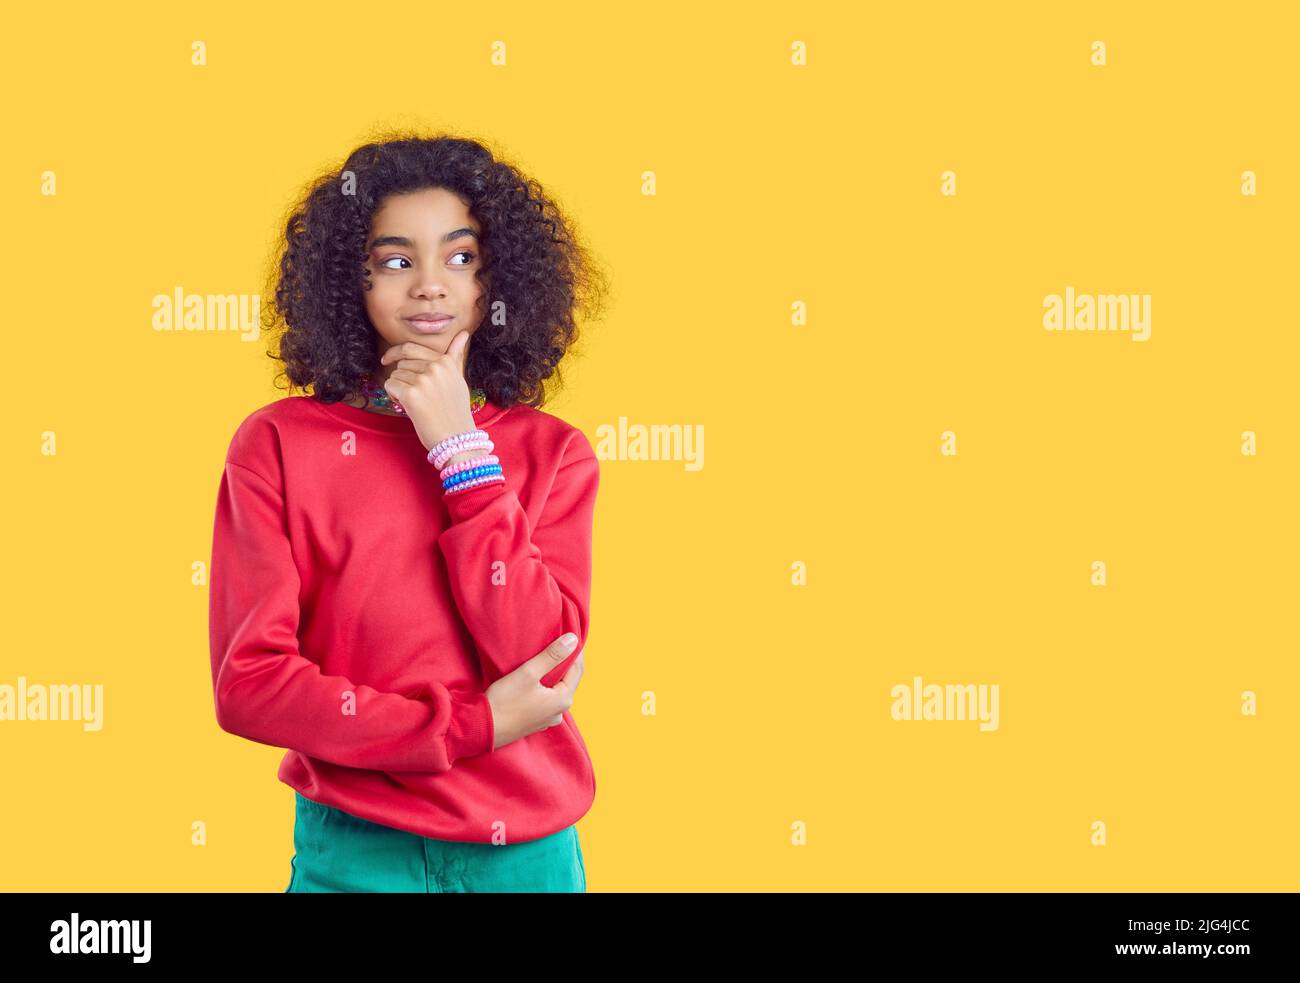 Cute smiling teen girl dreams, thinks, makes decisions or comes up with cunning plan. Stock Photo